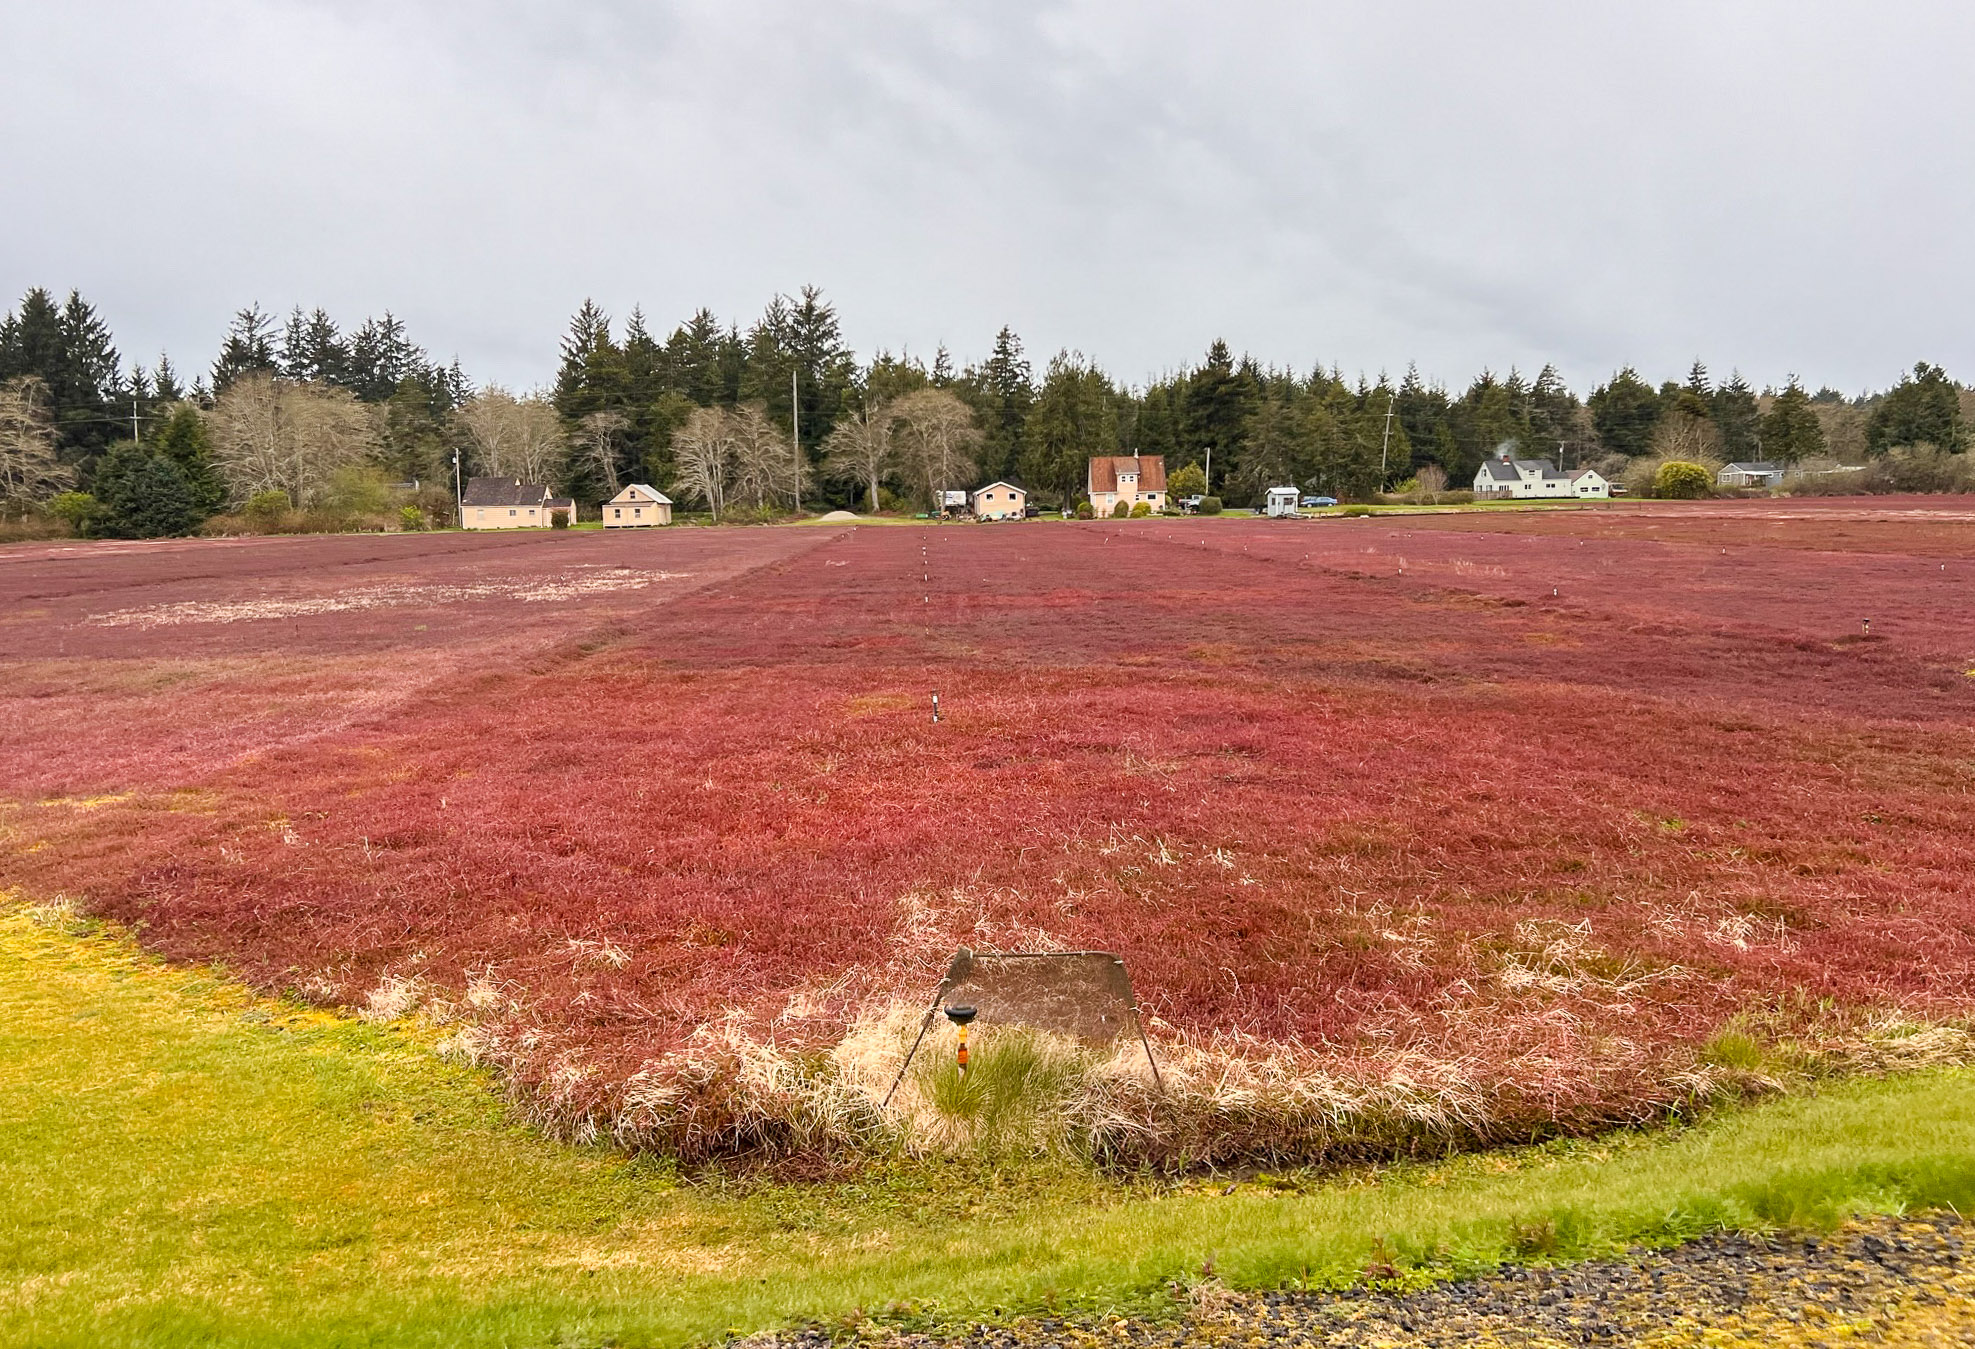 Acres and acres of cranberry bogs by Grayland Beach